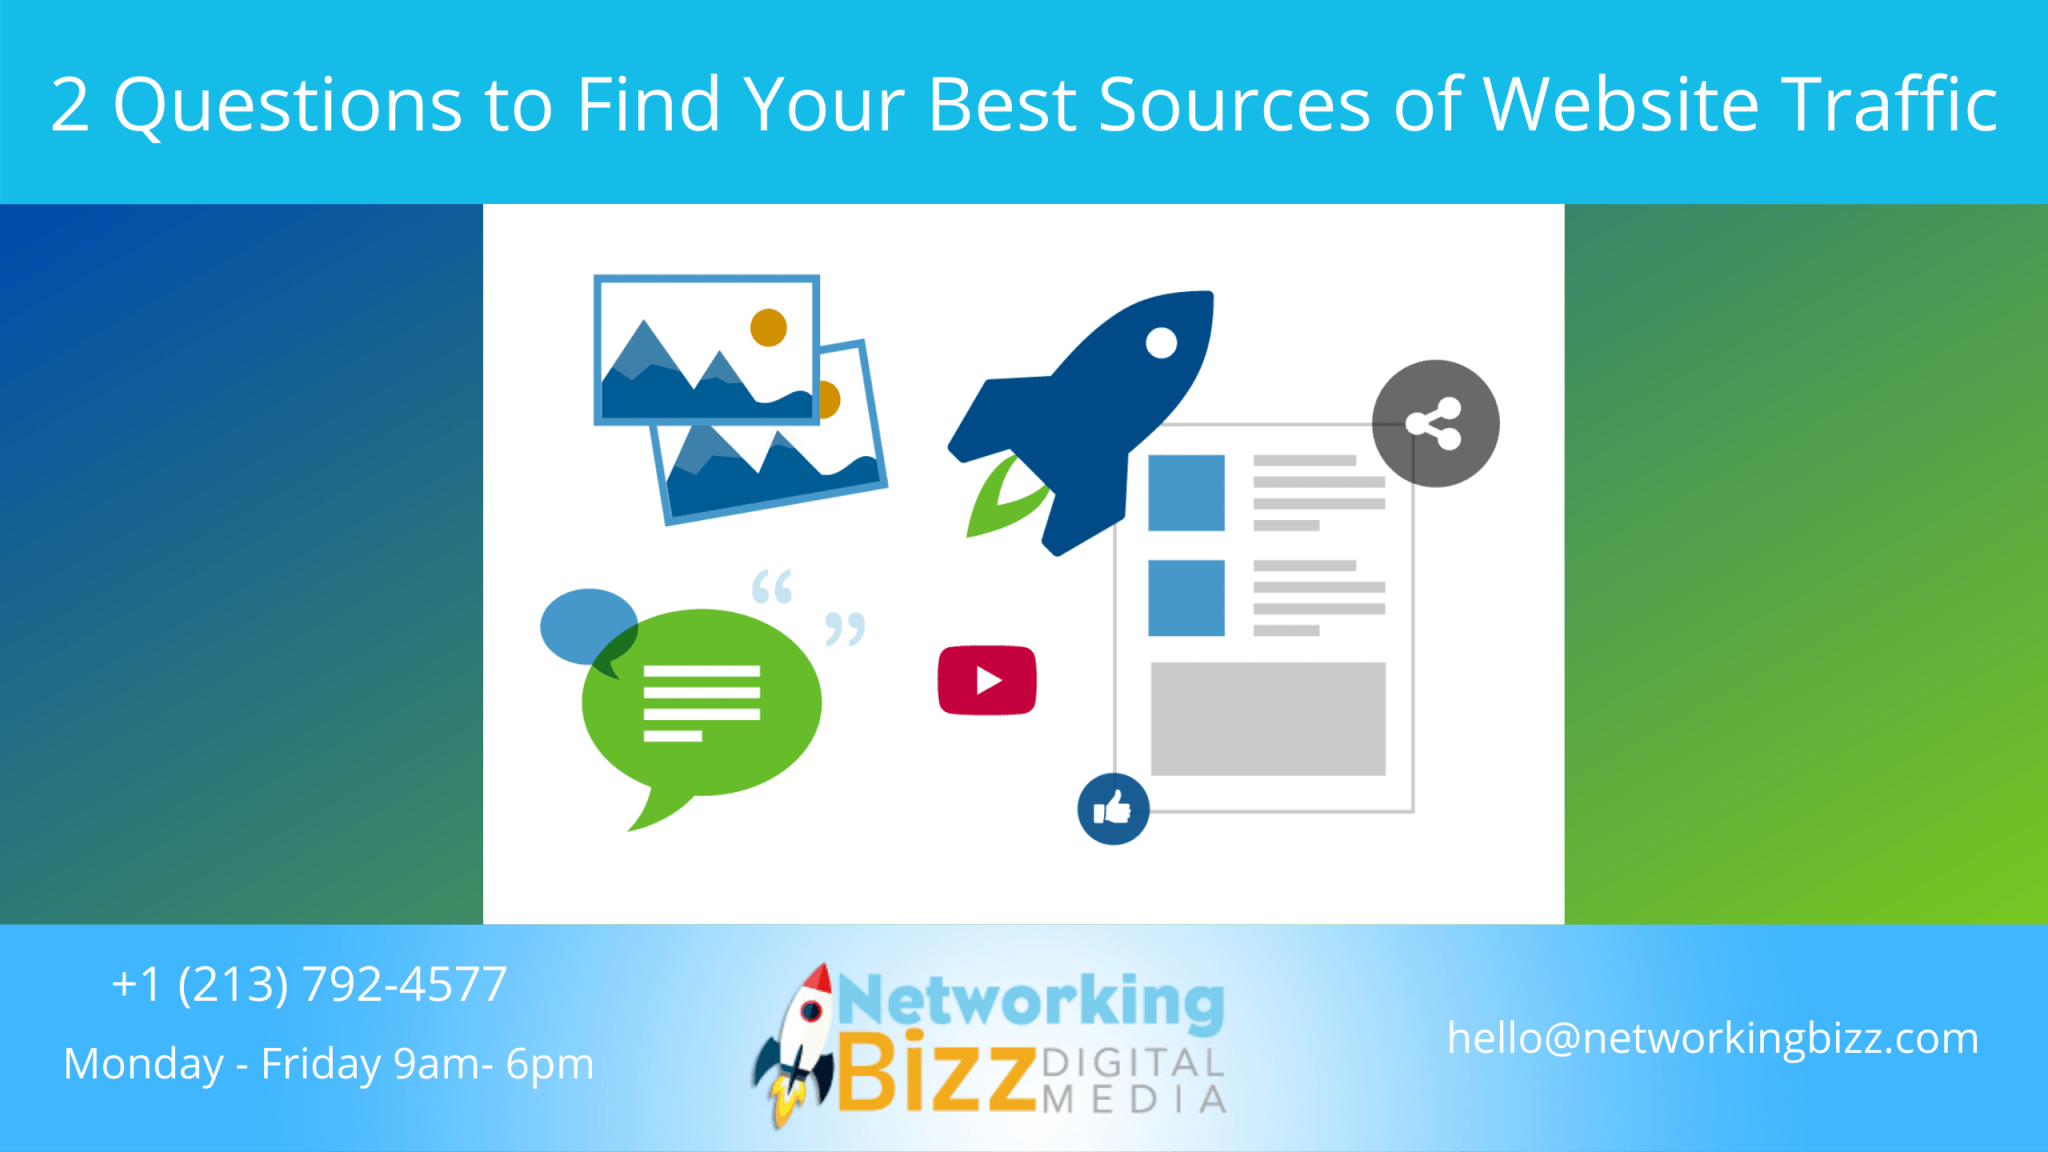 2 Questions to Find Your Best Sources of Website Traffic